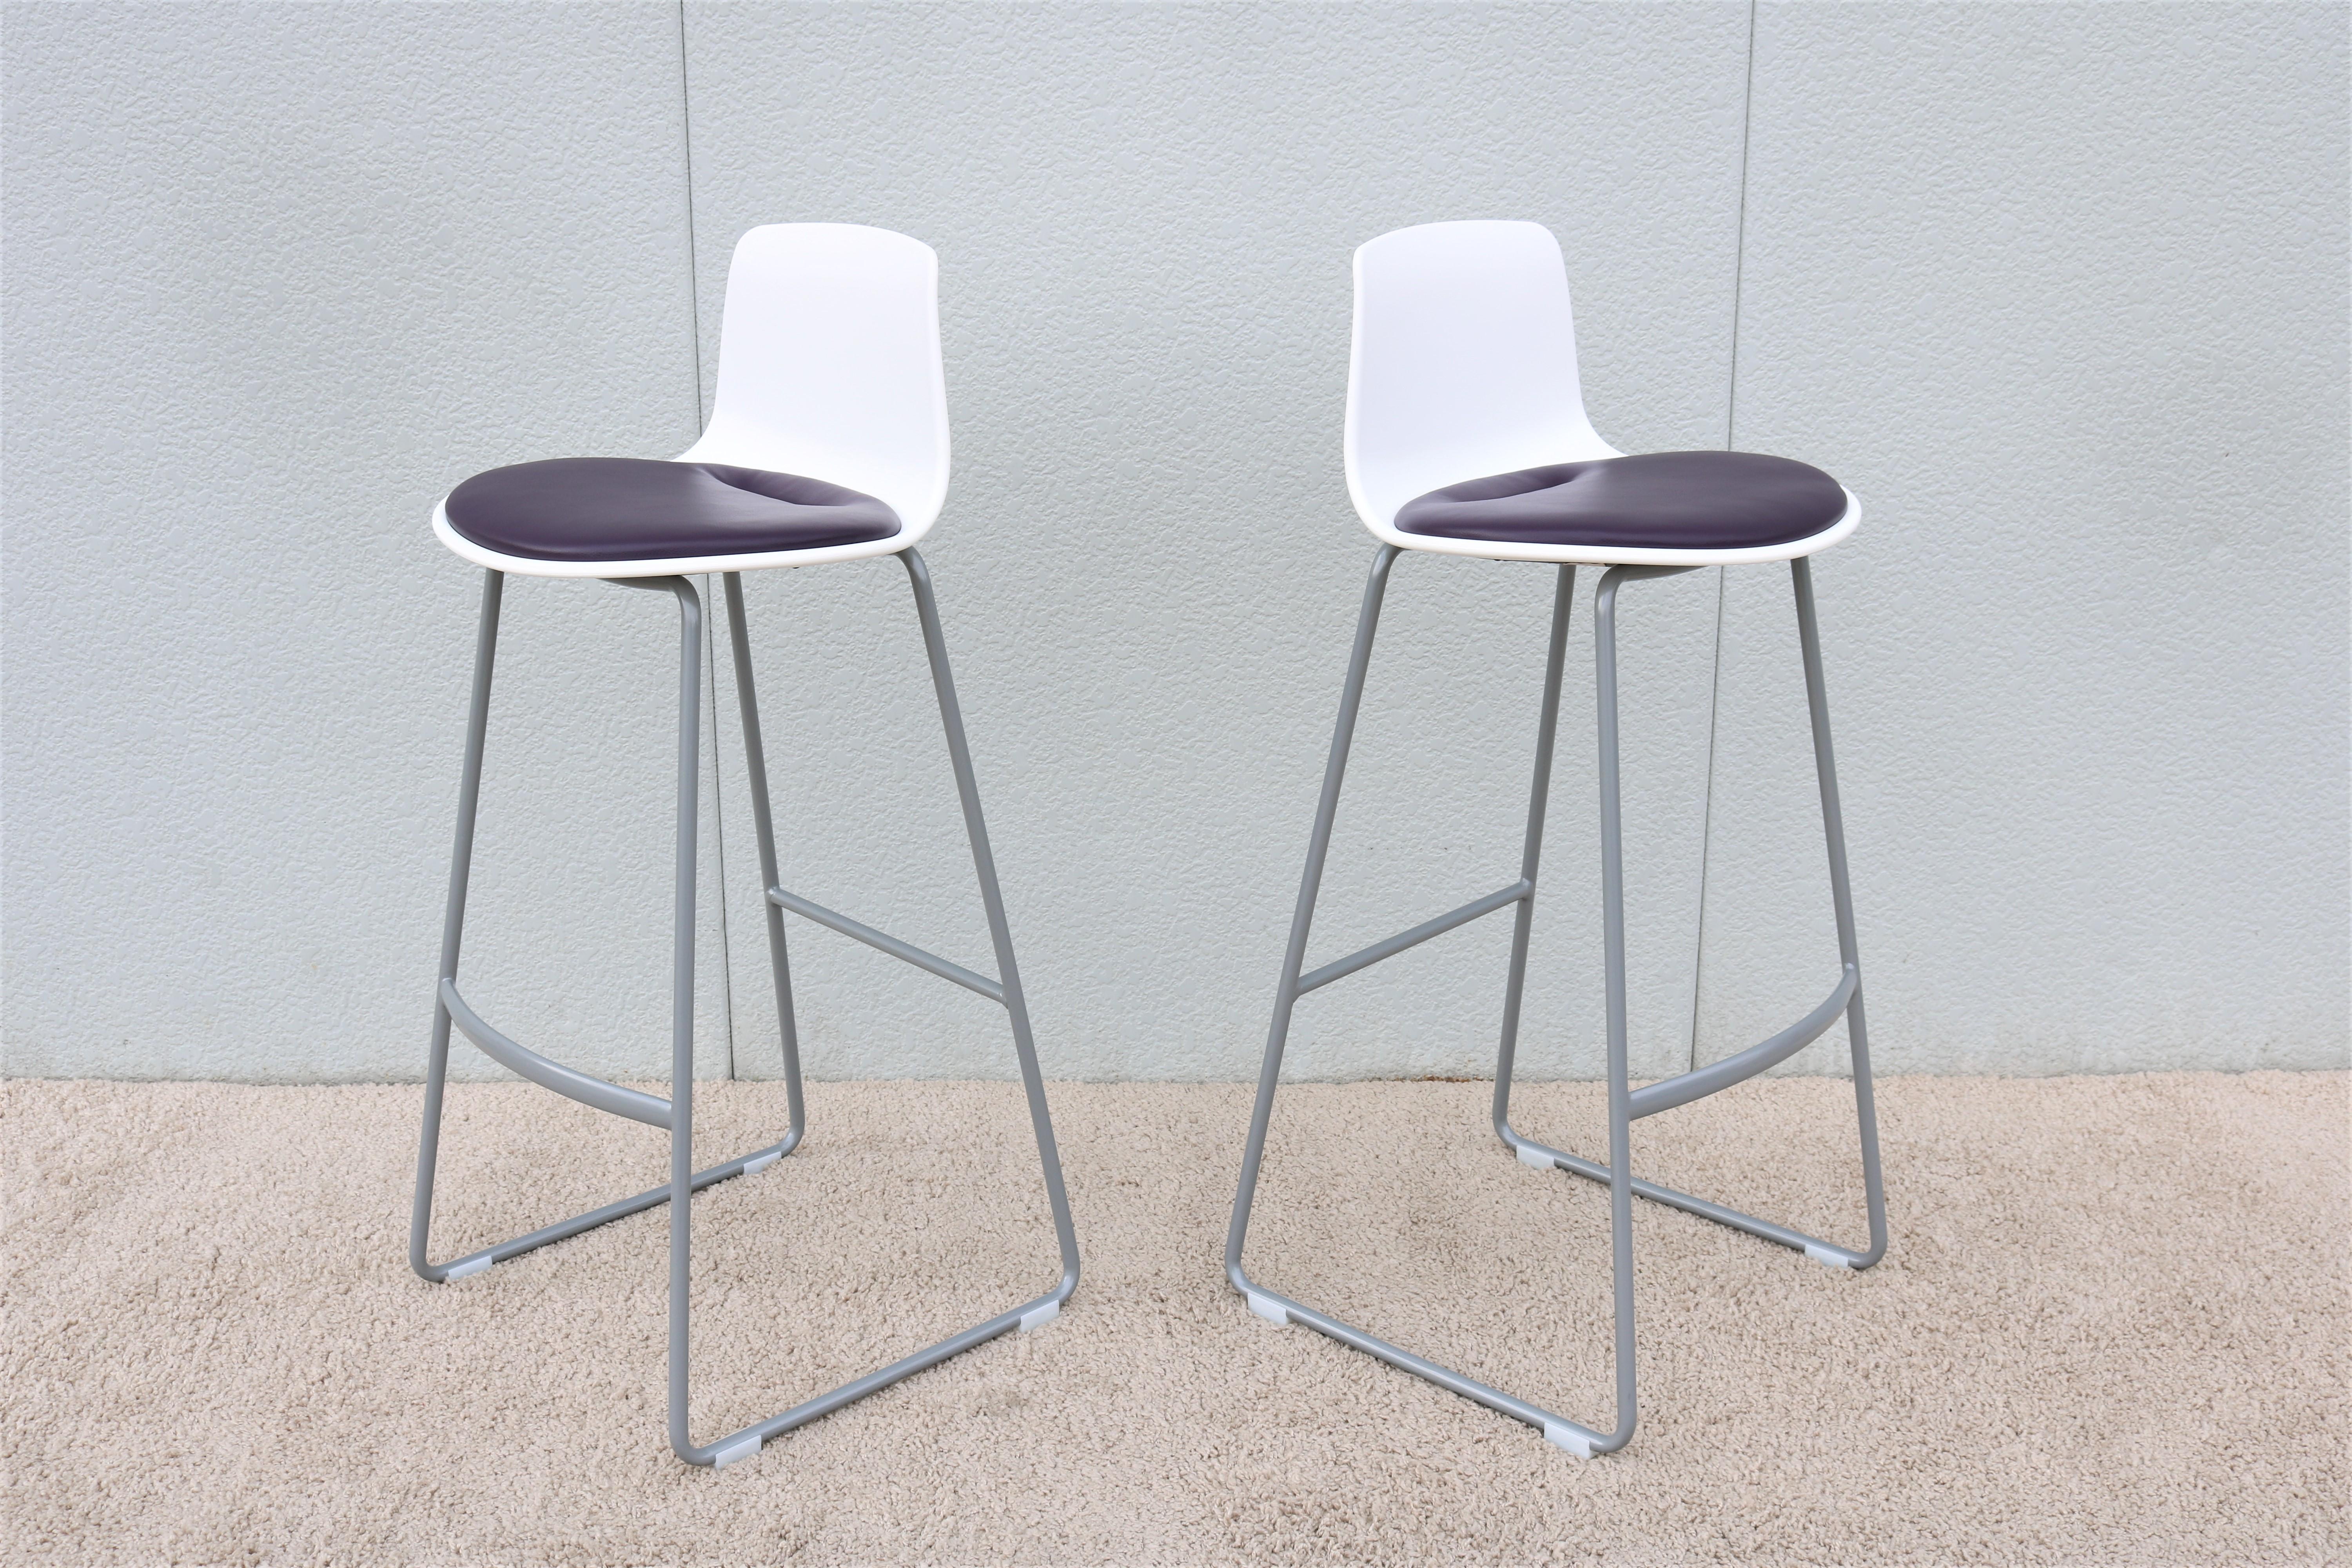 Molded Modern Lievore Altherr Molina for Coalesse Enea Lottus Bar Stools New, a Pair For Sale